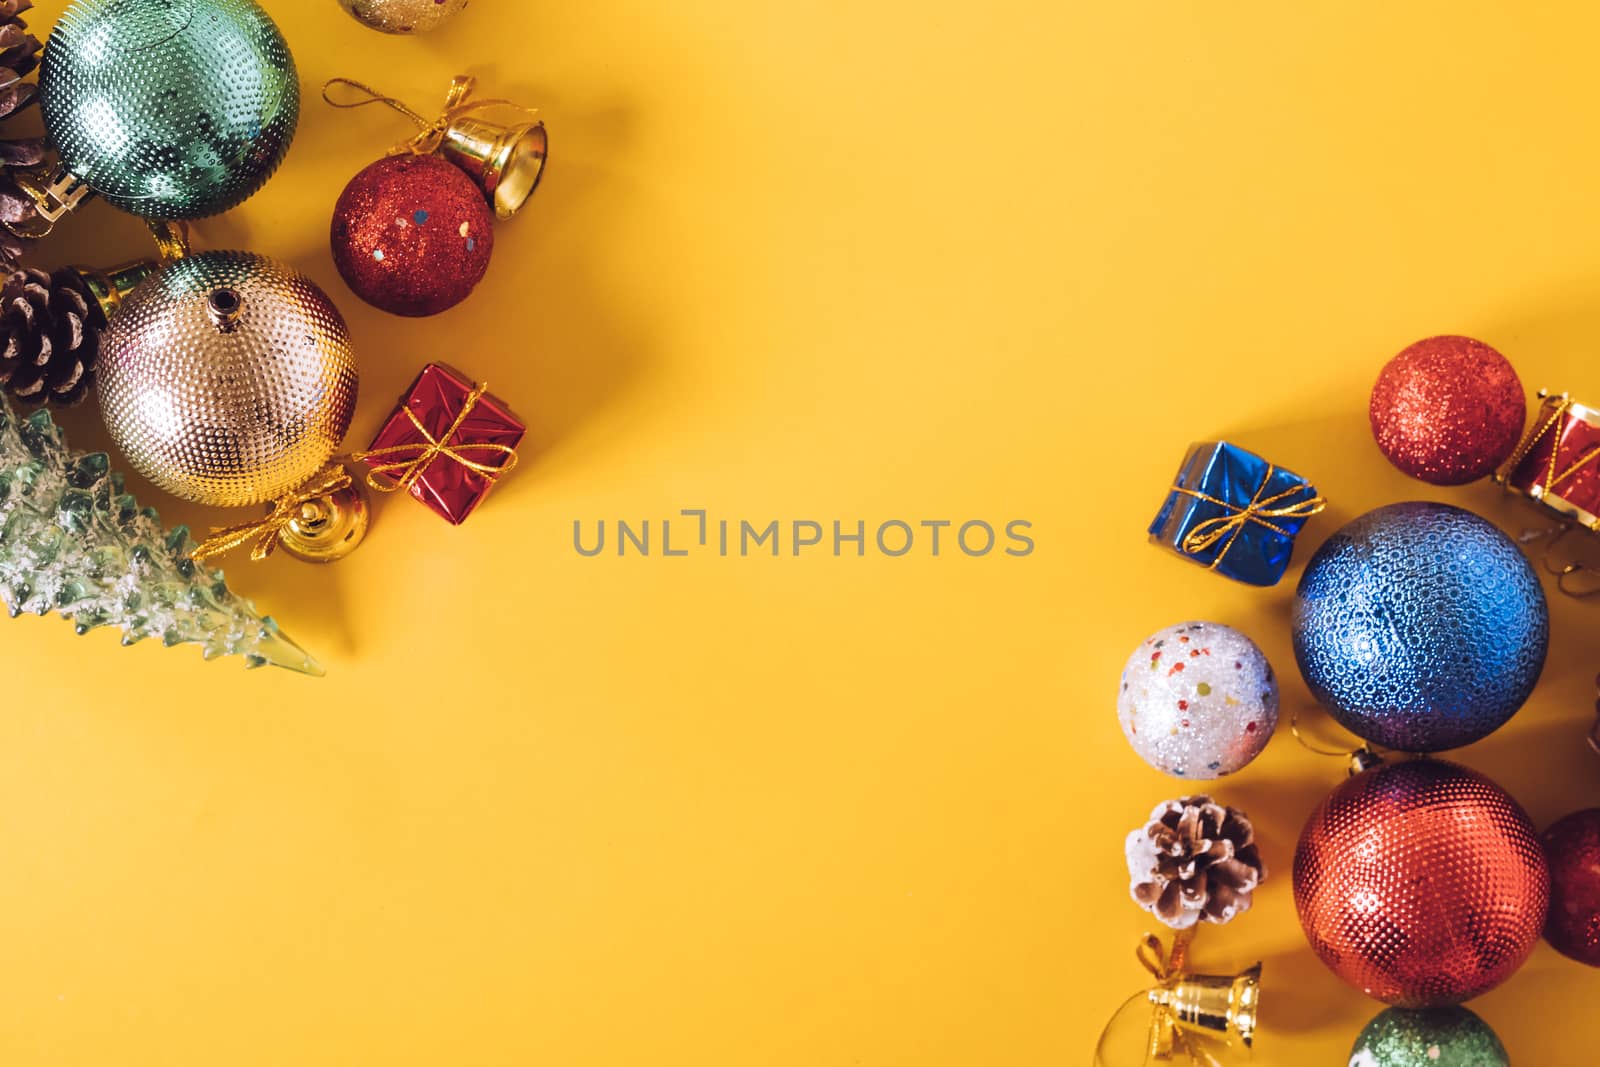 Top view of Christmas decorations on a yellow background. Free space for text